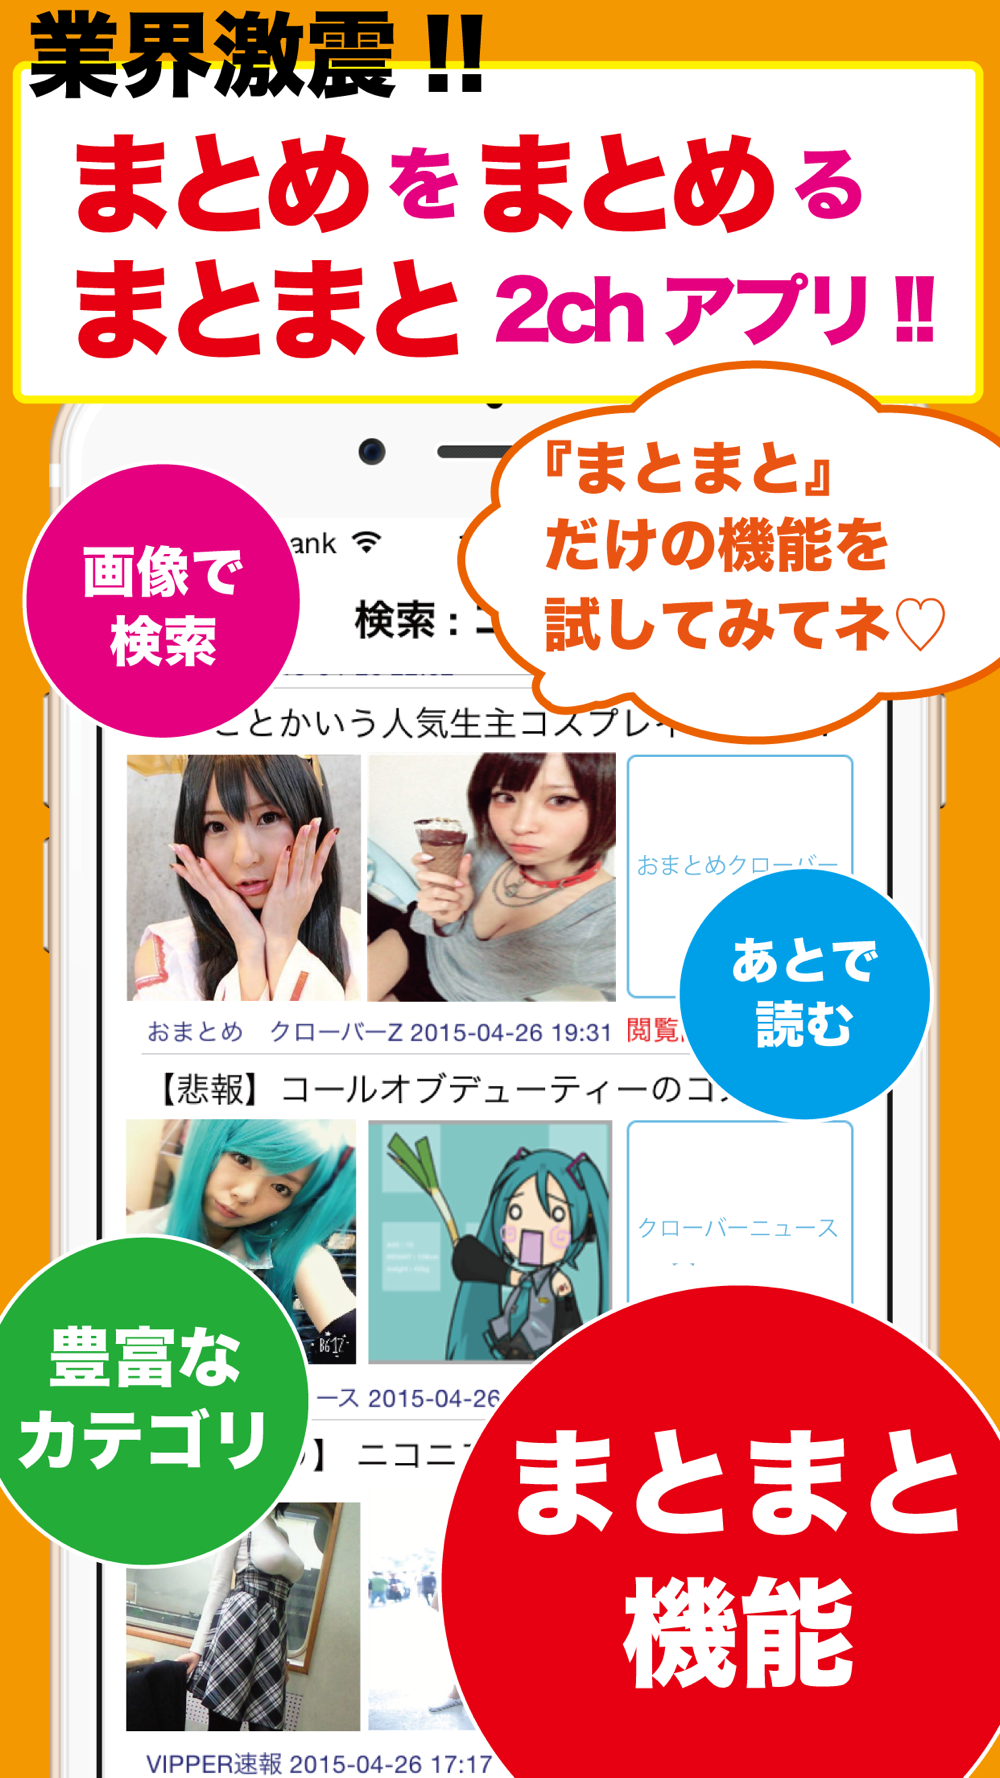 2chまとまと 人気2chニュース速報まとめにまとめました Free Download App For Iphone Steprimo Com